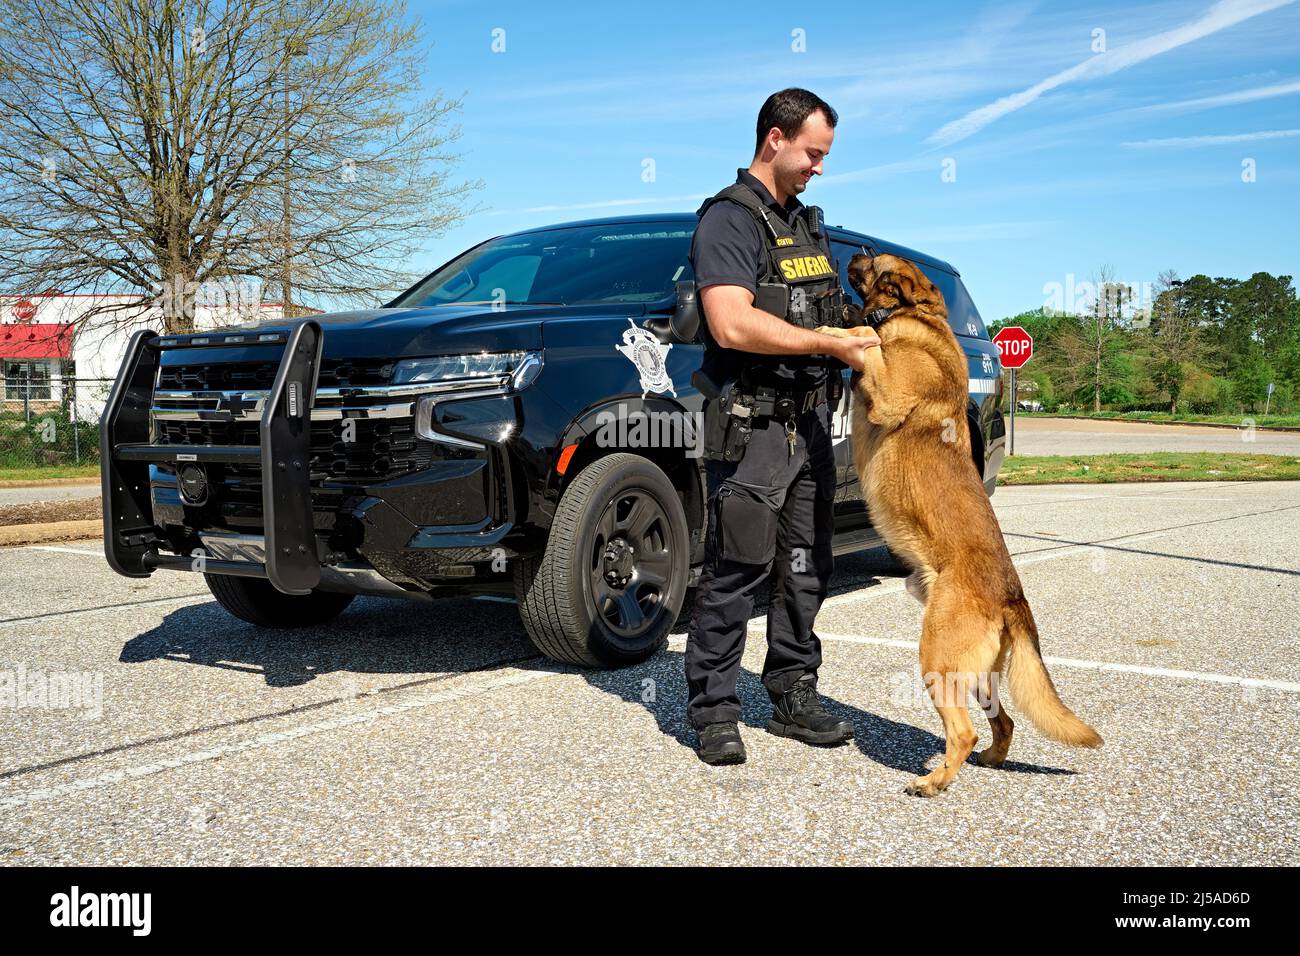 Law enforcement police K-9 officer or deputy sheriff K-9 with his police K-9 dog in front of a police SUV cruiser in Montgomery Alabama, USA. Stock Photo